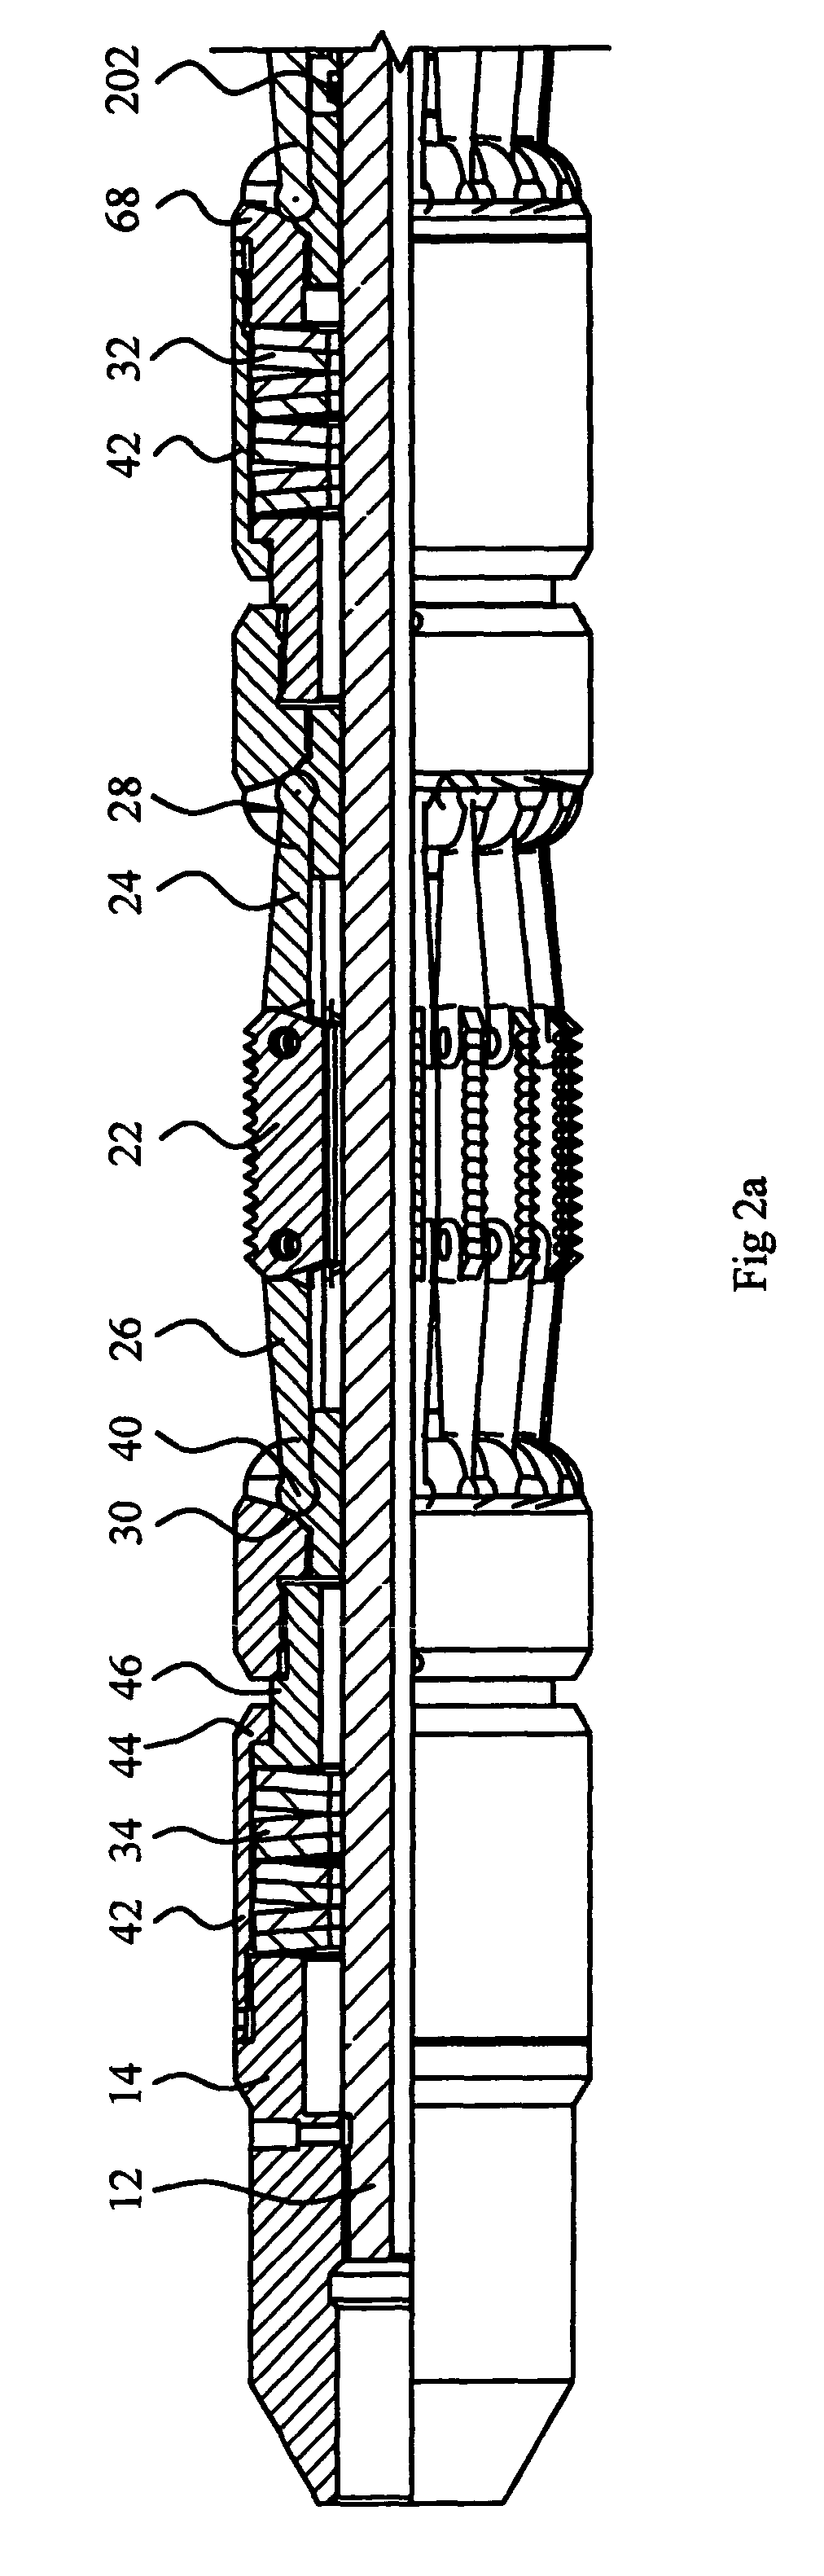 Method and device related to a retrievable well plug